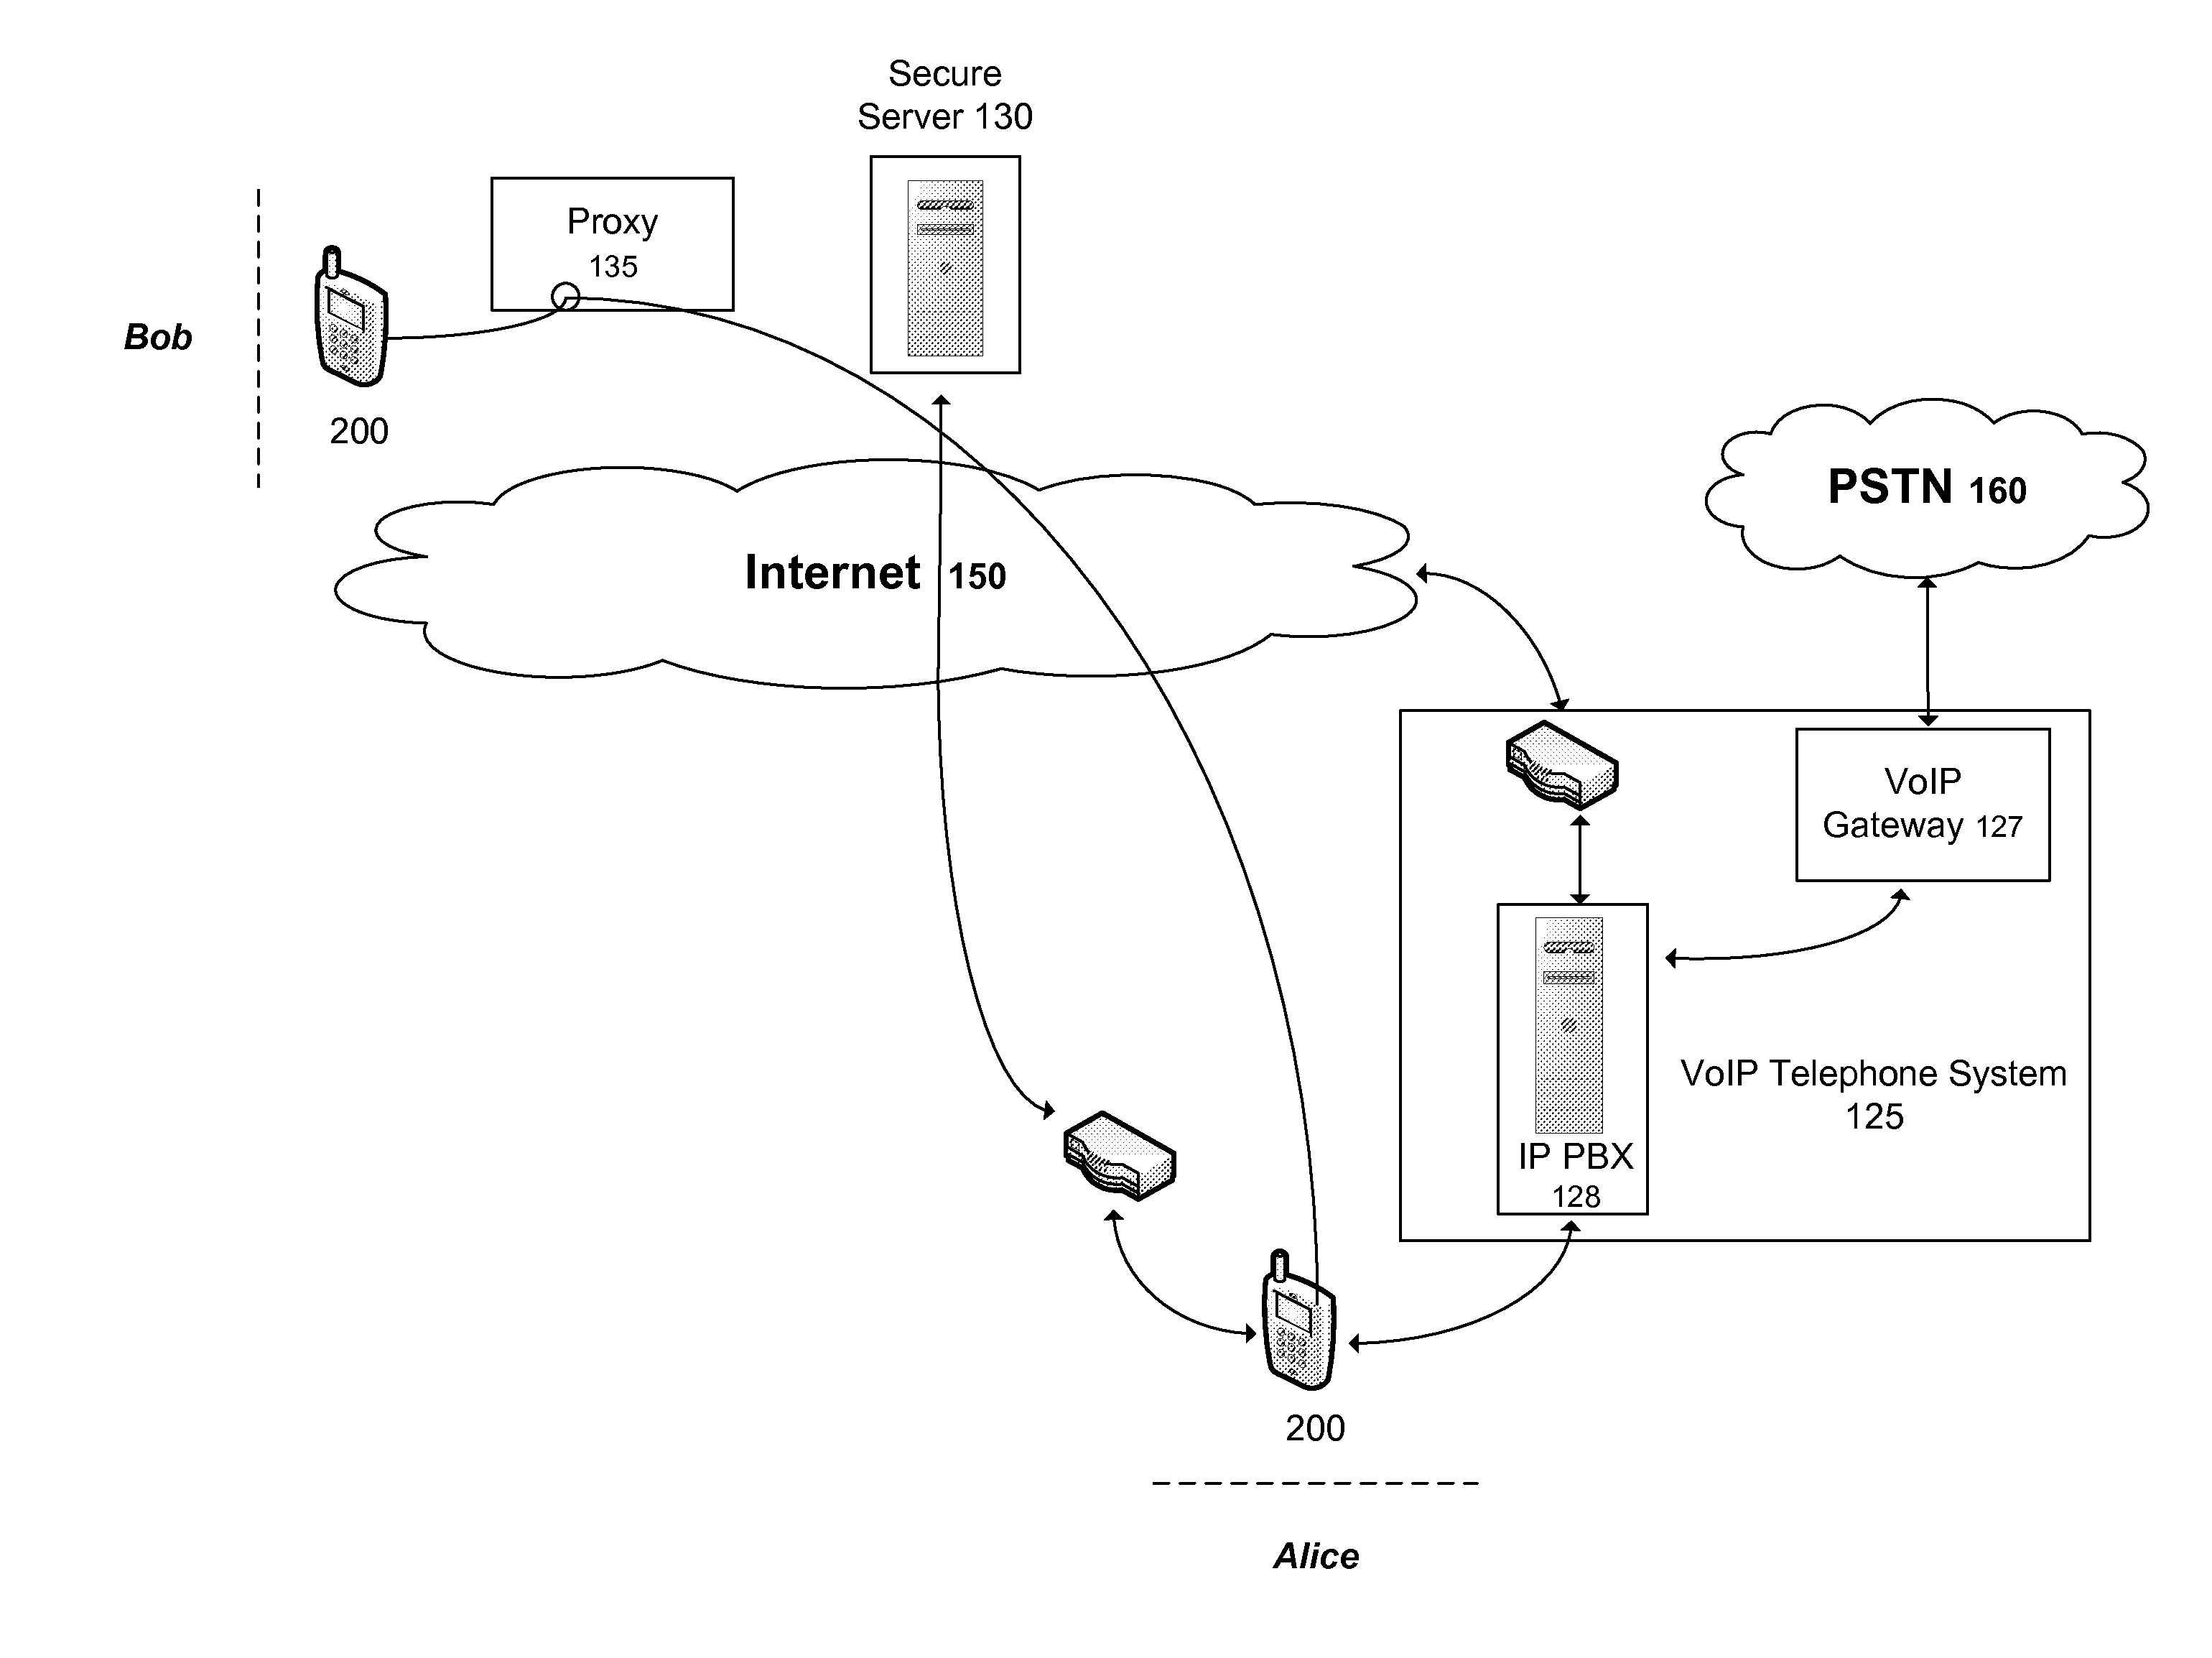 Technique For Bypassing an IP PBX